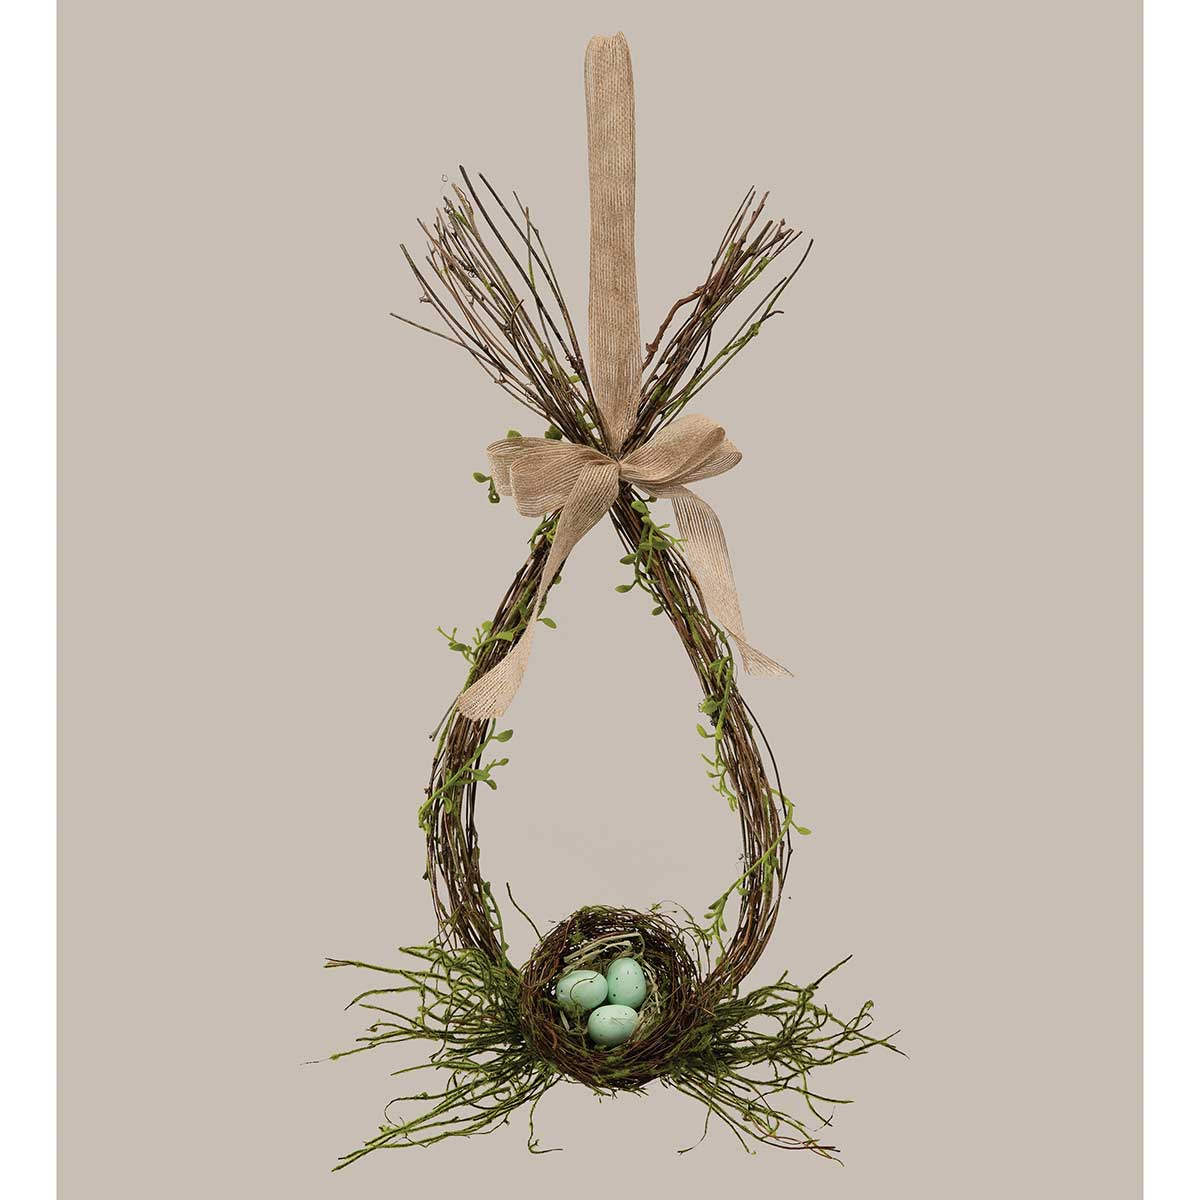 WREATH OVAL TWIG WITH NEST 12IN X 20IN TWIG/WOOD